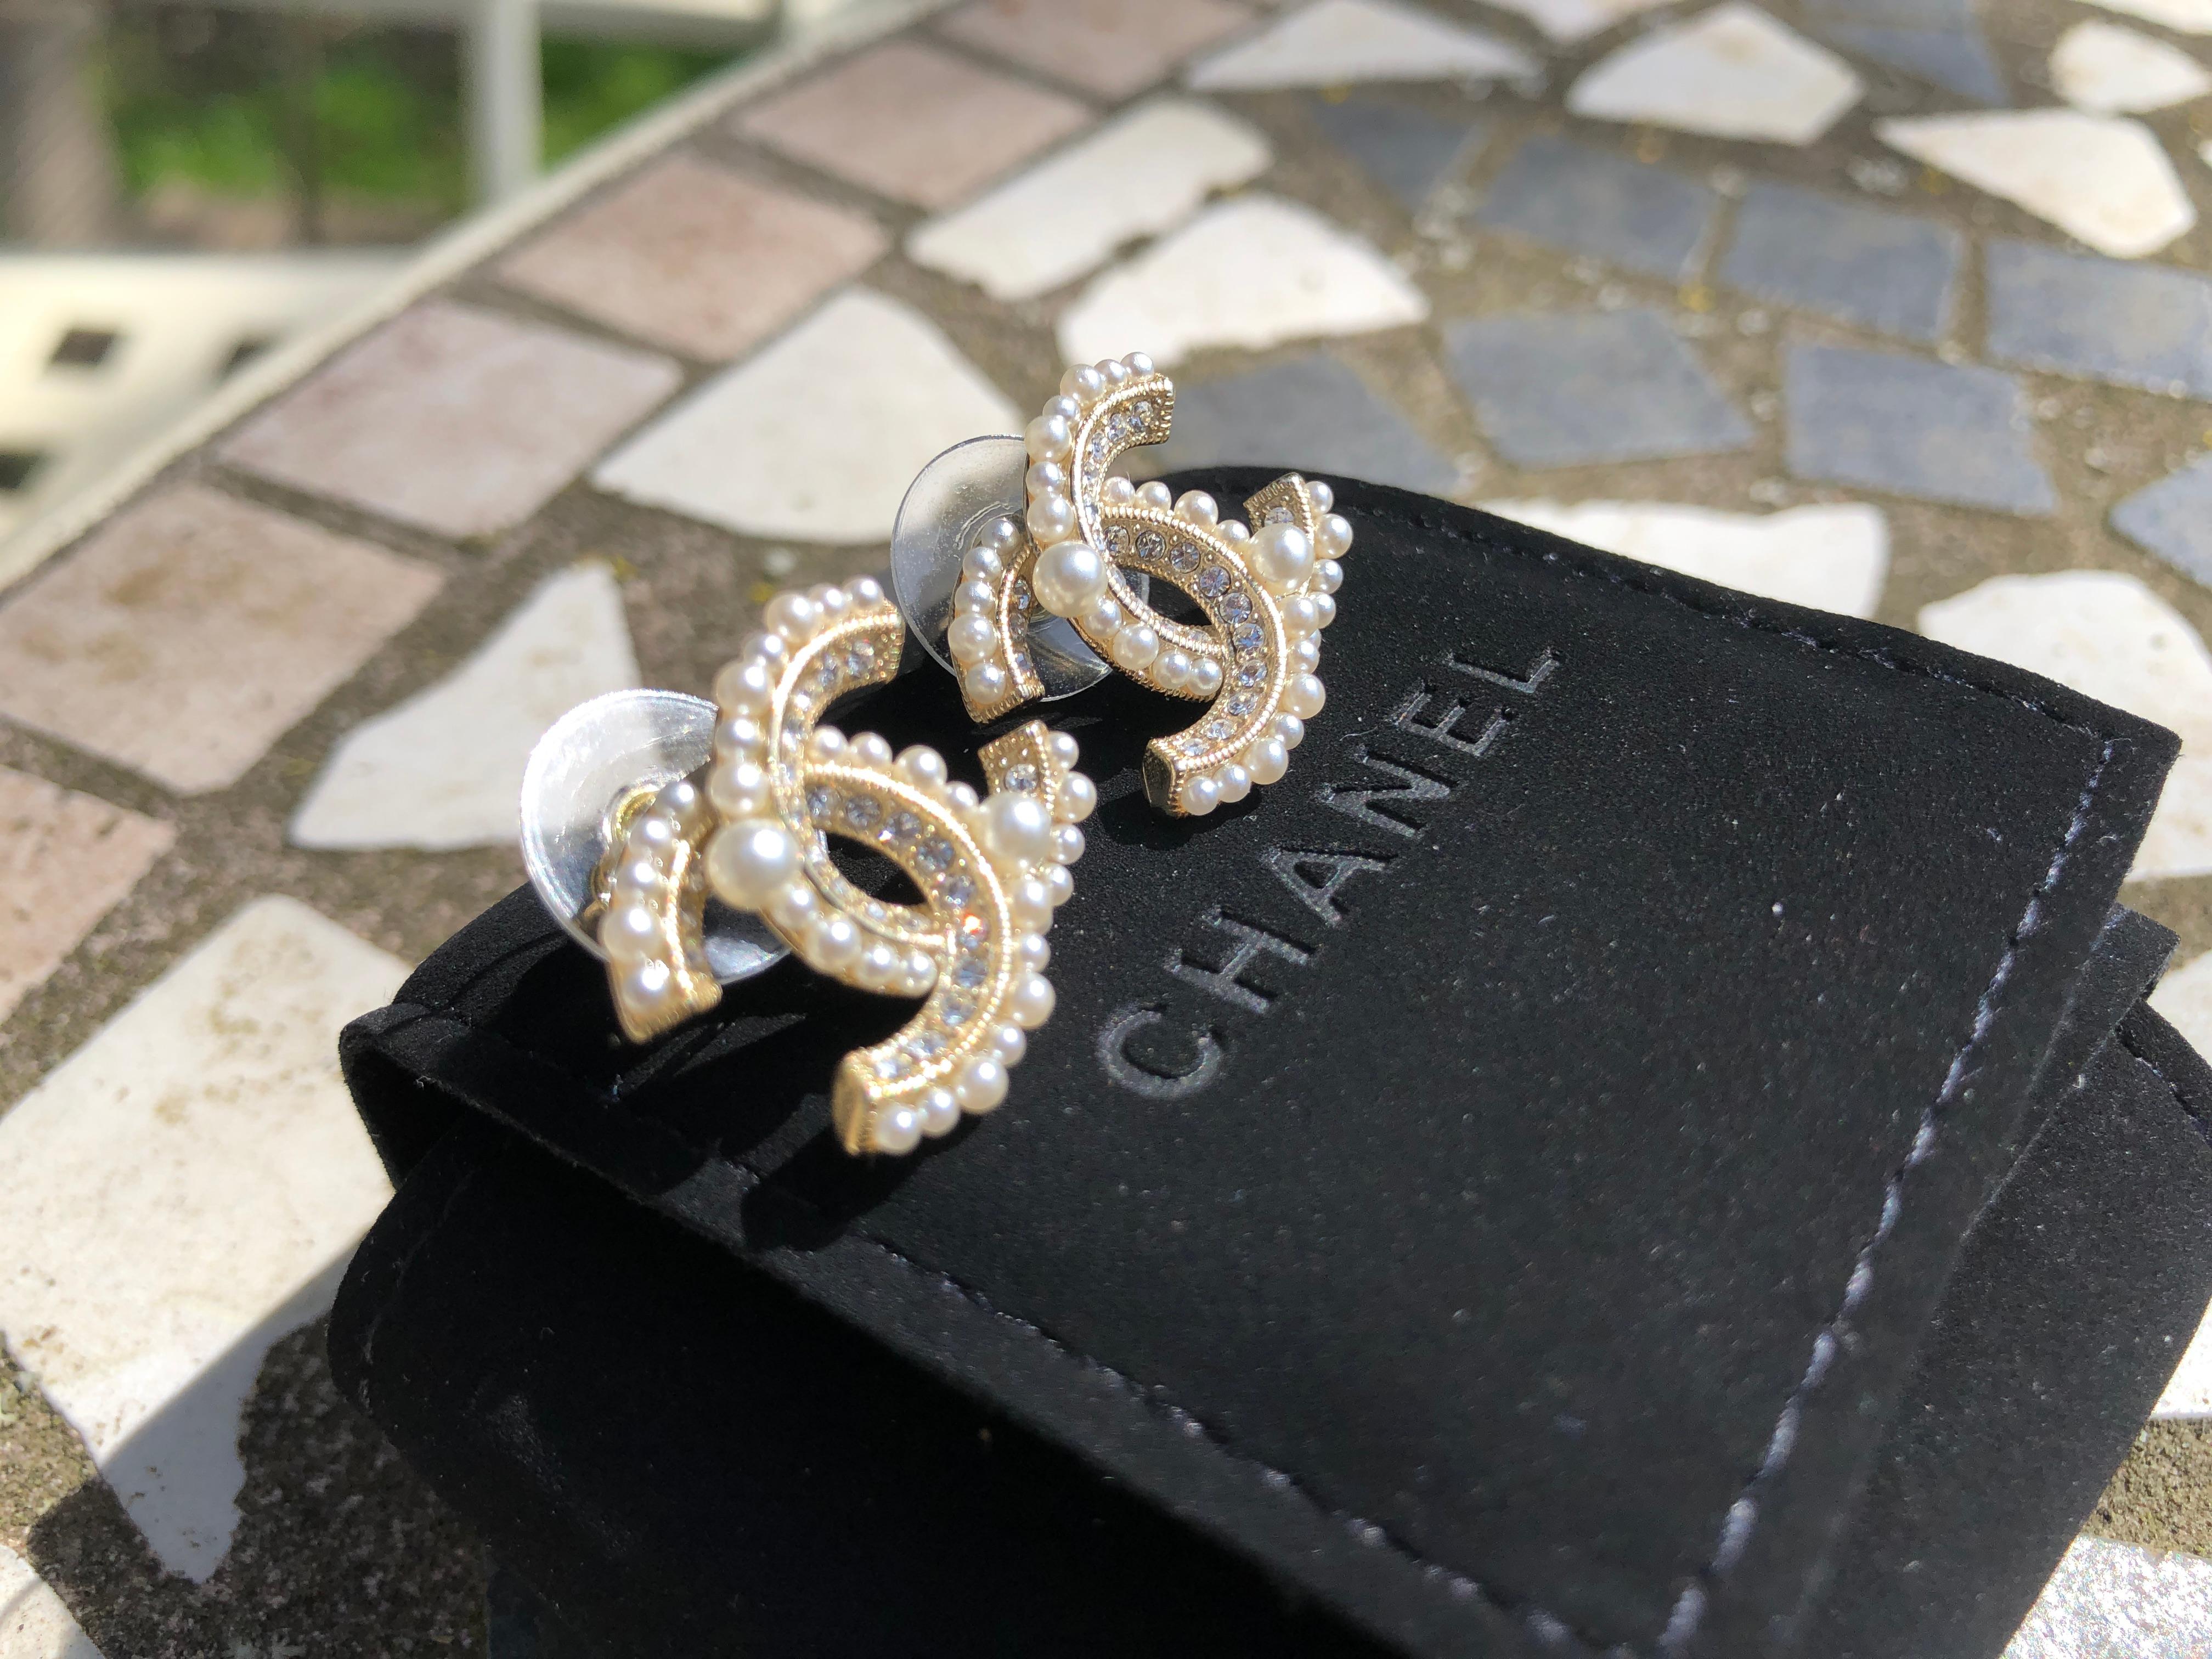 The Chanel CC pearl earrings make a fashionable twist to the classic Chanel earrings. Crafted in Pale gold-tone metal, the pearls come in an elegant cream hue. Ensemble these with formals in white, as these could be mixed and matched for an